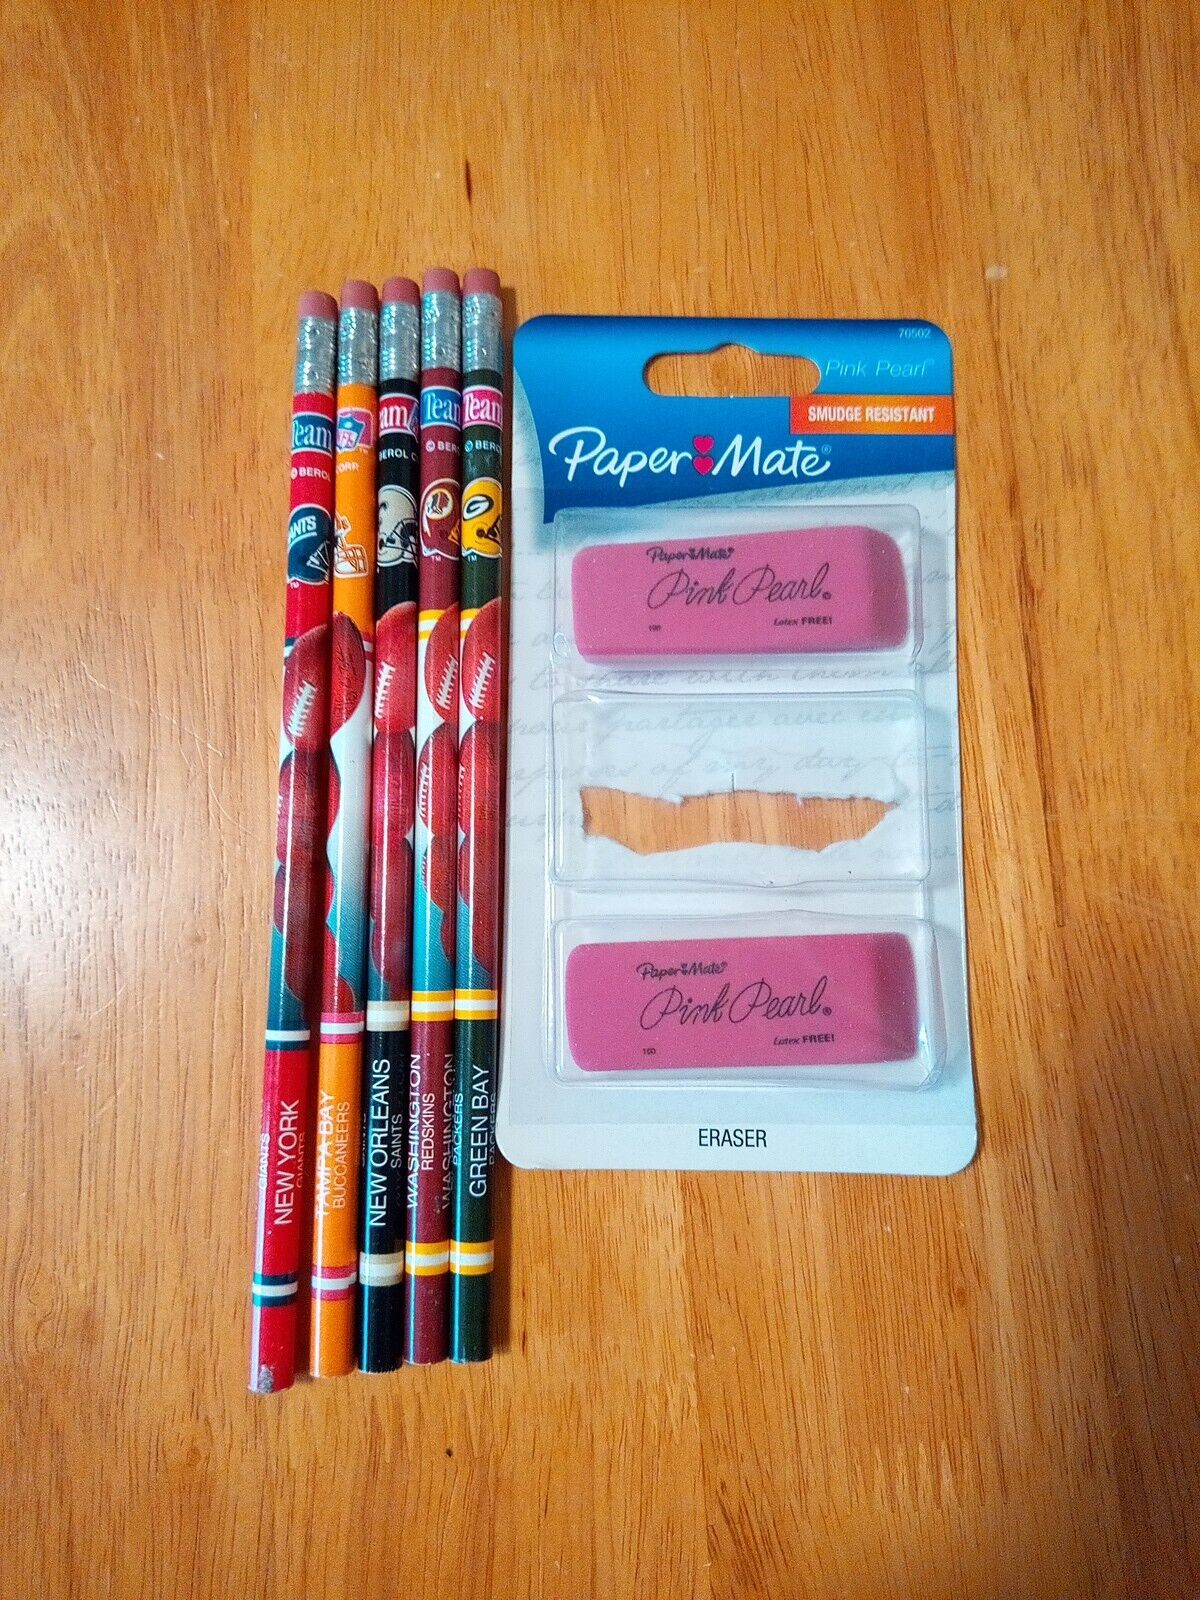 5 NFL Berol Pencils Some Scratches/2 Pink Pearl Erasers One Missing From Package